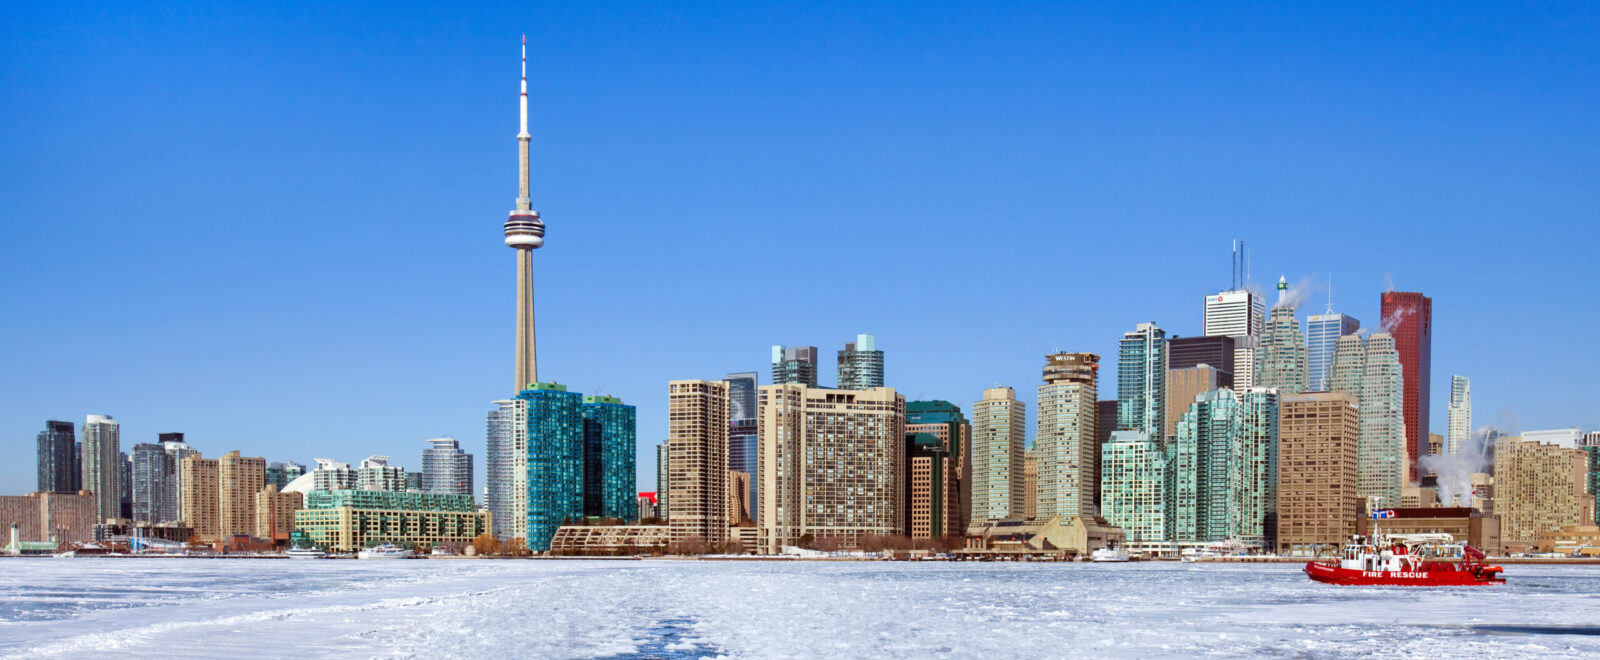 Toronto, Canada, in the snow and ice